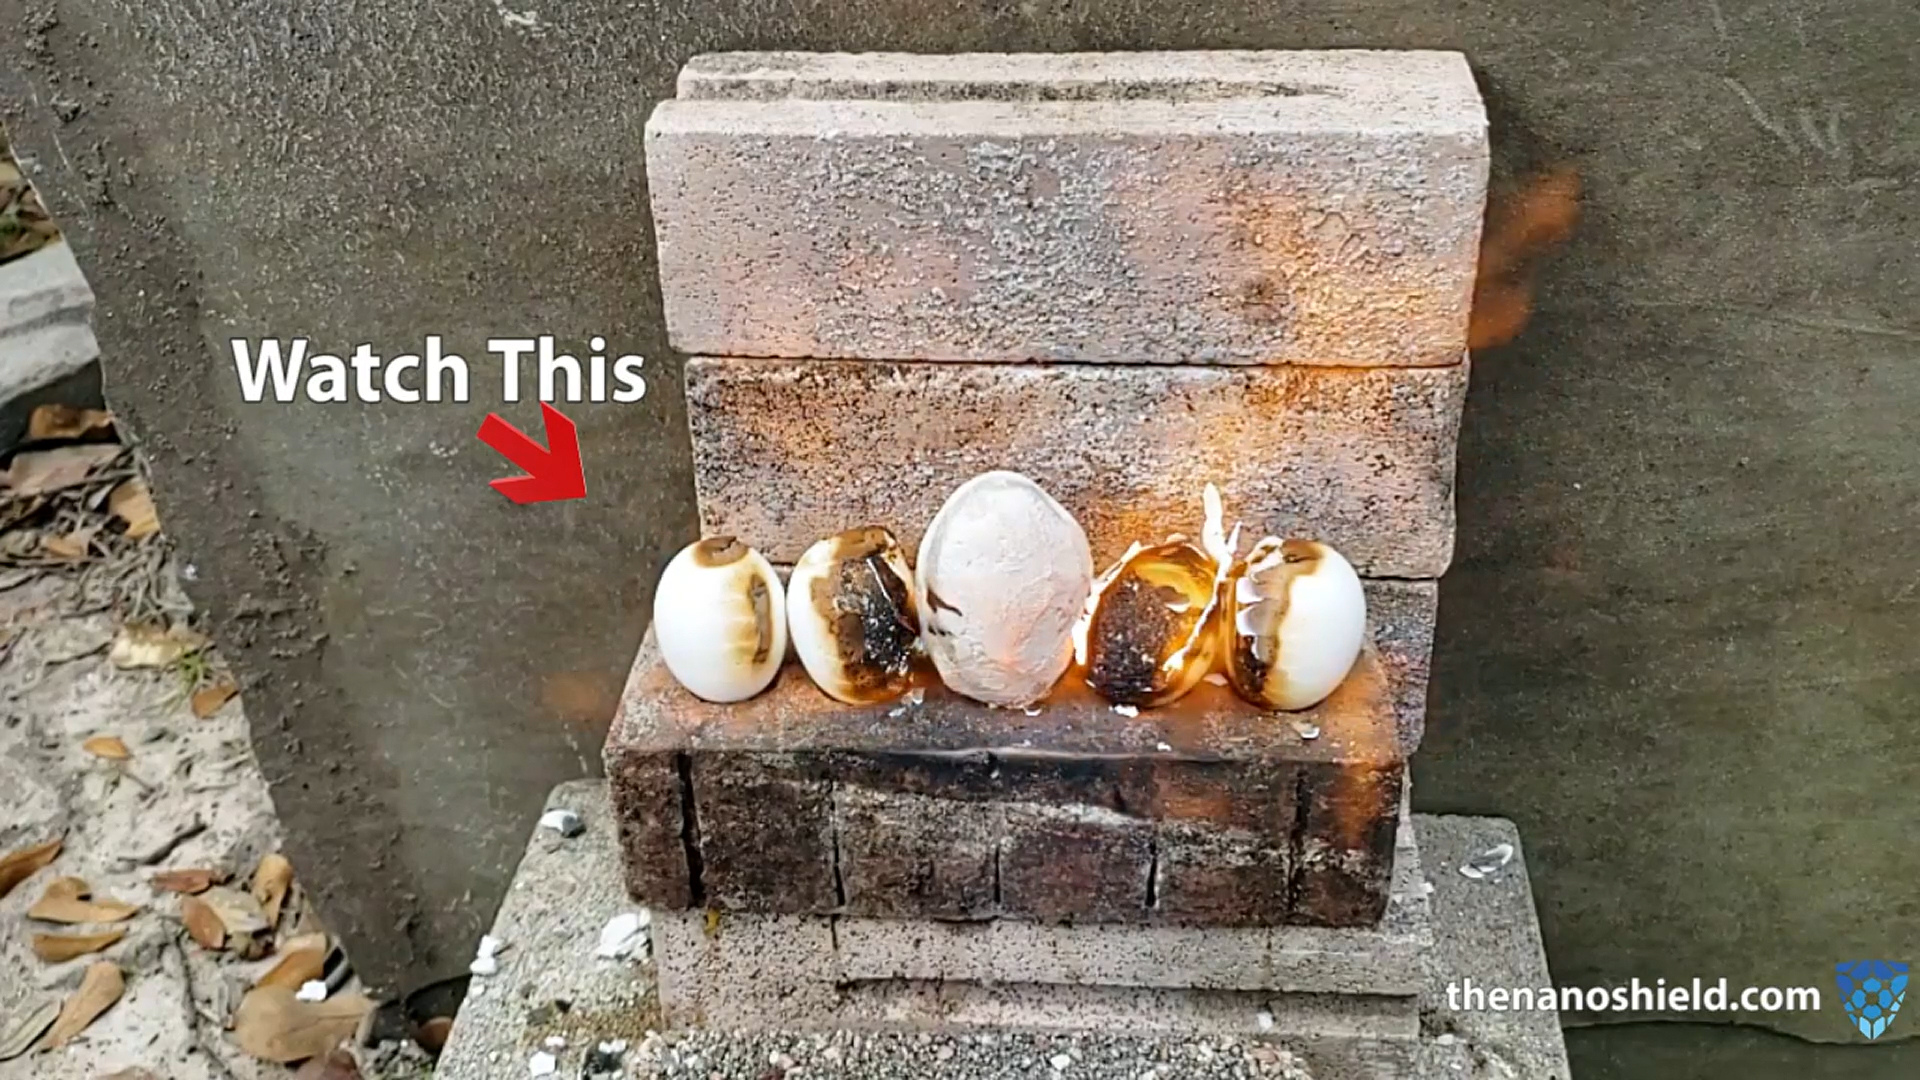 NanoTech's Fireproof Coating Protecting an Egg From a Direct Flame